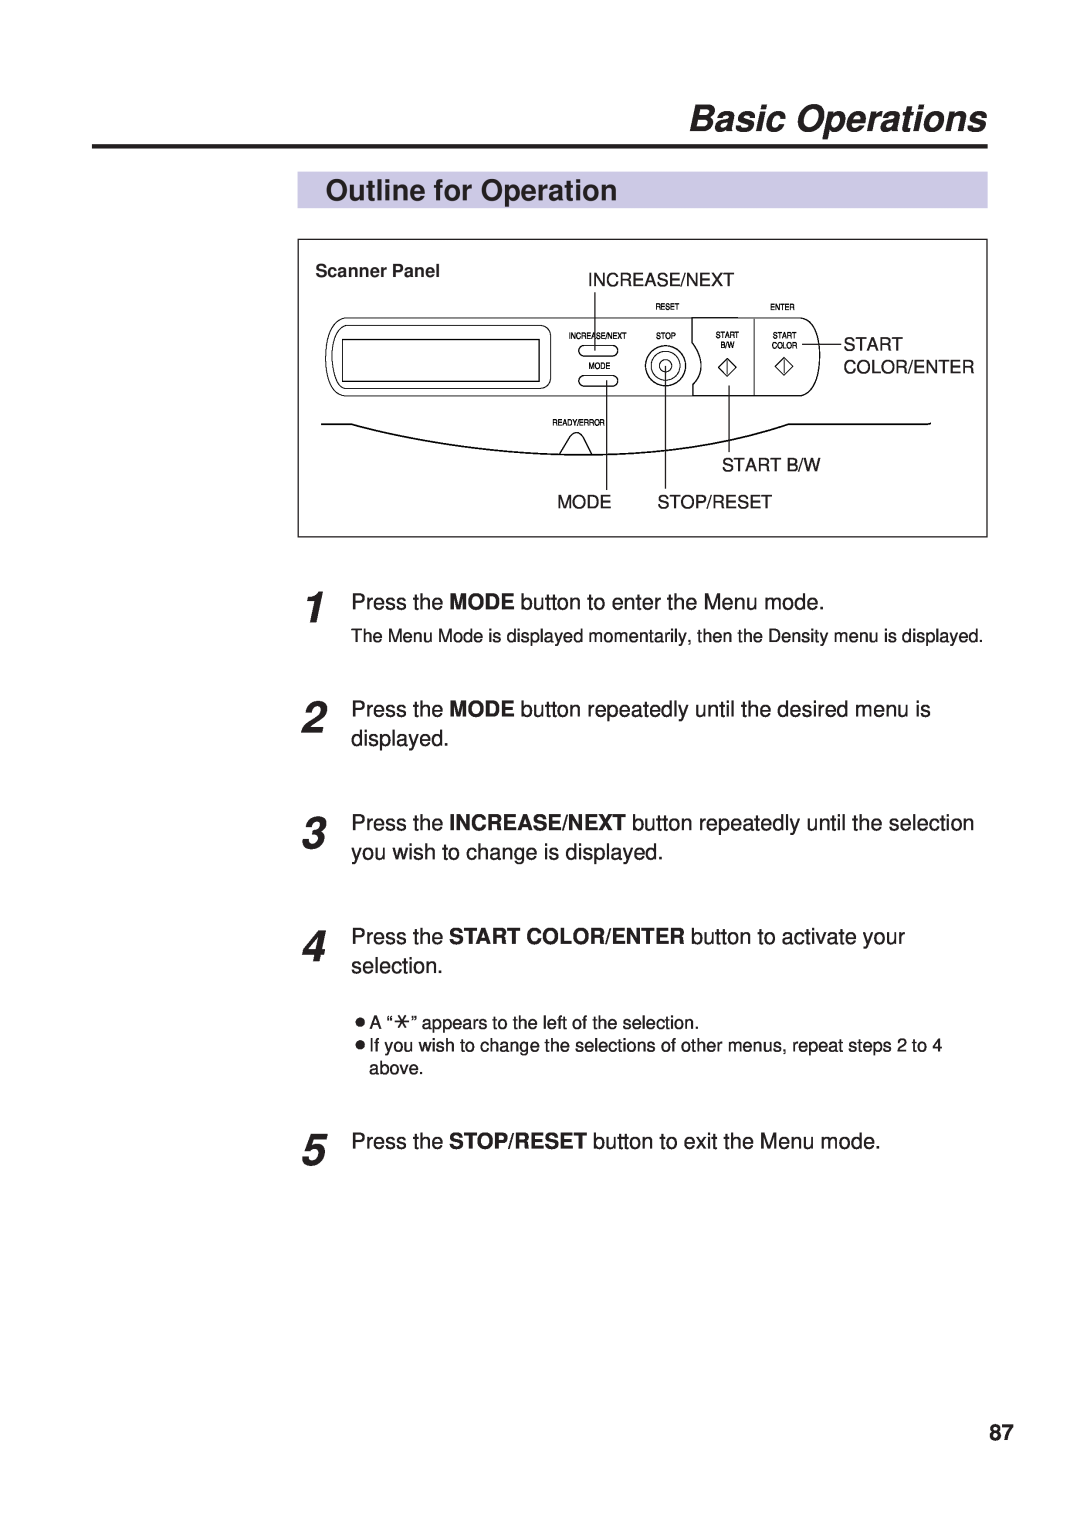 Panasonic KX-PS8000 manual Outline for Operation, Basic Operations 